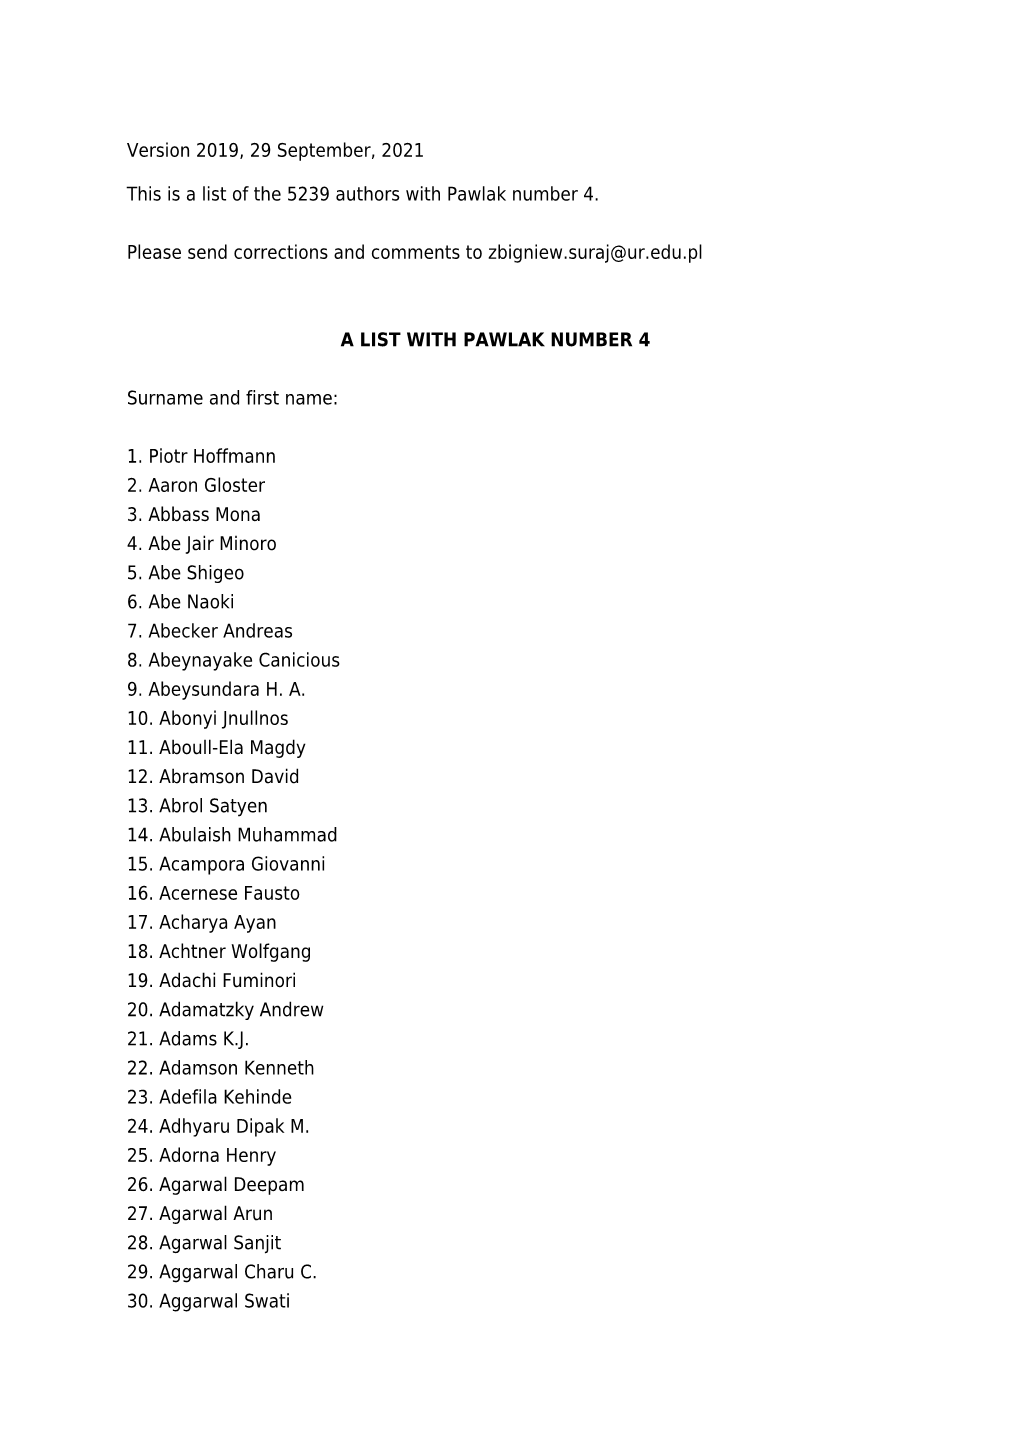 Version 2019, 14 May, 2021 This Is a List of the 5239 Authors With